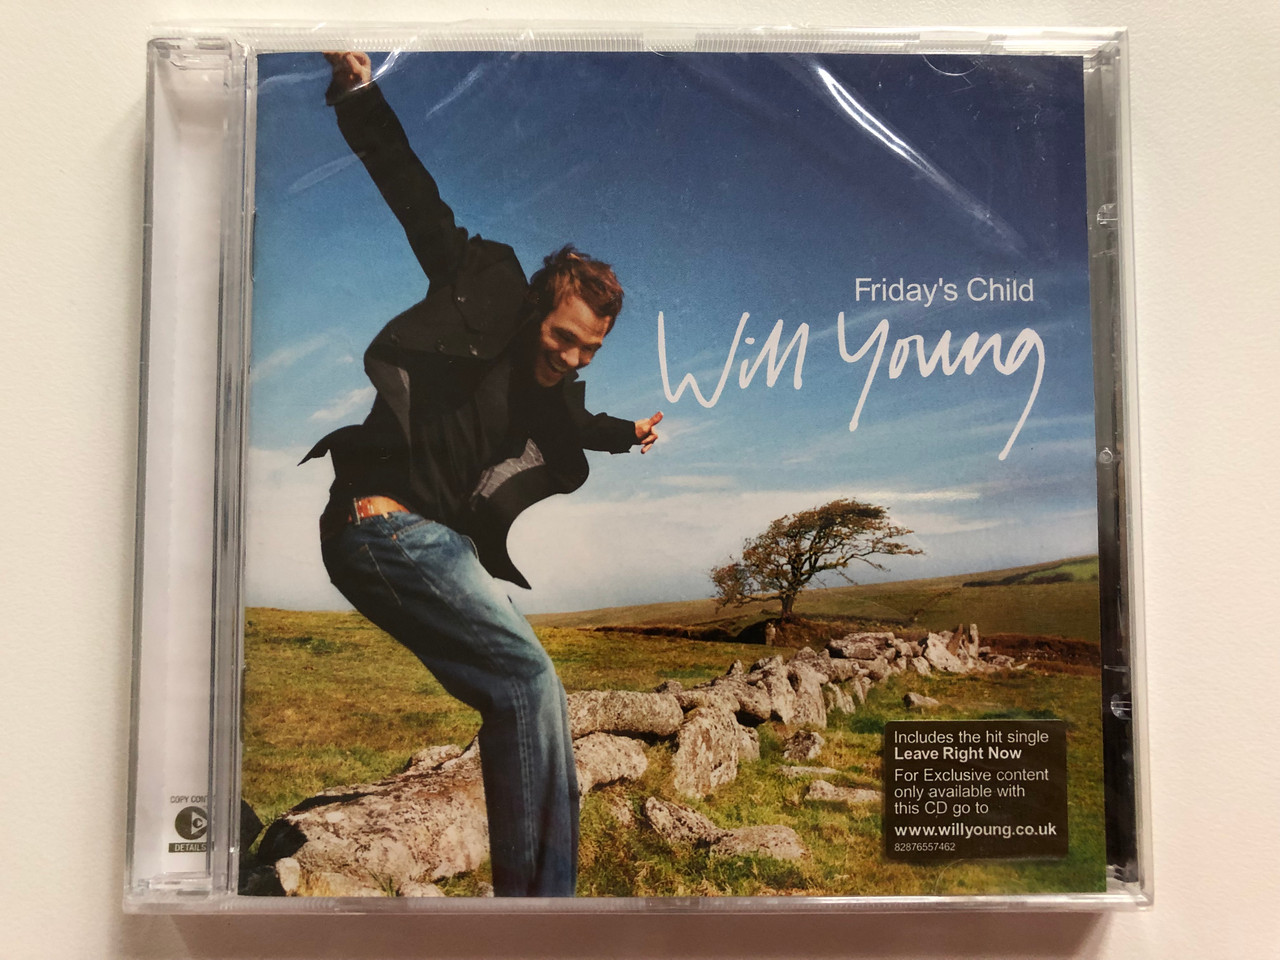 https://cdn10.bigcommerce.com/s-62bdpkt7pb/products/0/images/207910/Will_Young_Fridays_Child_Includes_the_hit_single_Leave_Right_Now_For_Exclusive_content_only_available_with_this_CD_go_to_www.willyoung.co.uk_19_Recordings_Audio_CD_2003_82876557462_1__99533.1642569541.1280.1280.JPG?c=2&_gl=1*1vz8ud*_ga*MjA2NTIxMjE2MC4xNTkwNTEyNTMy*_ga_WS2VZYPC6G*MTY0MjU2ODQxNC4yNjYuMS4xNjQyNTY5MzQyLjQz